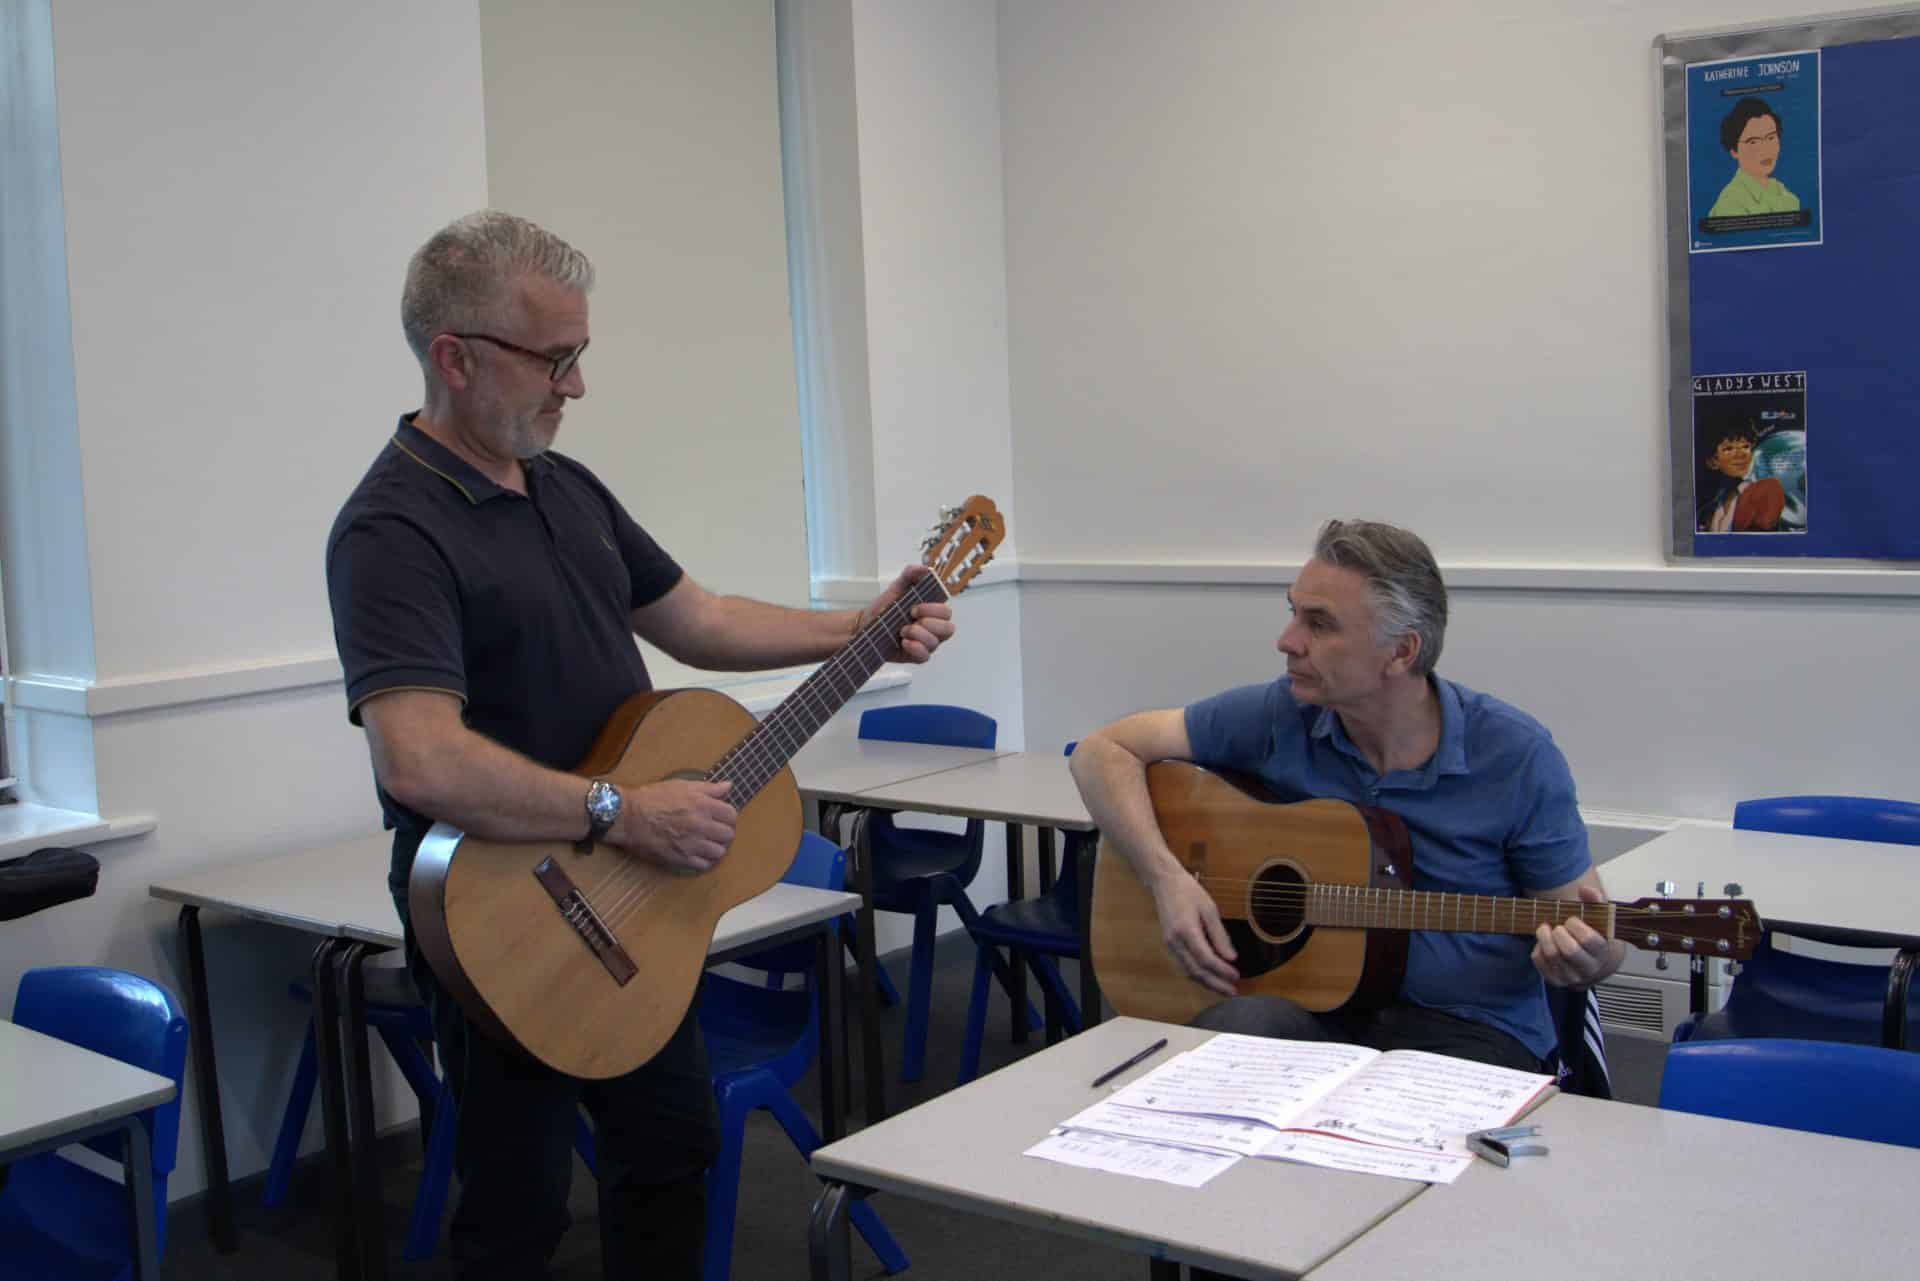 Two men (one sitting and one standing) playing the guitar